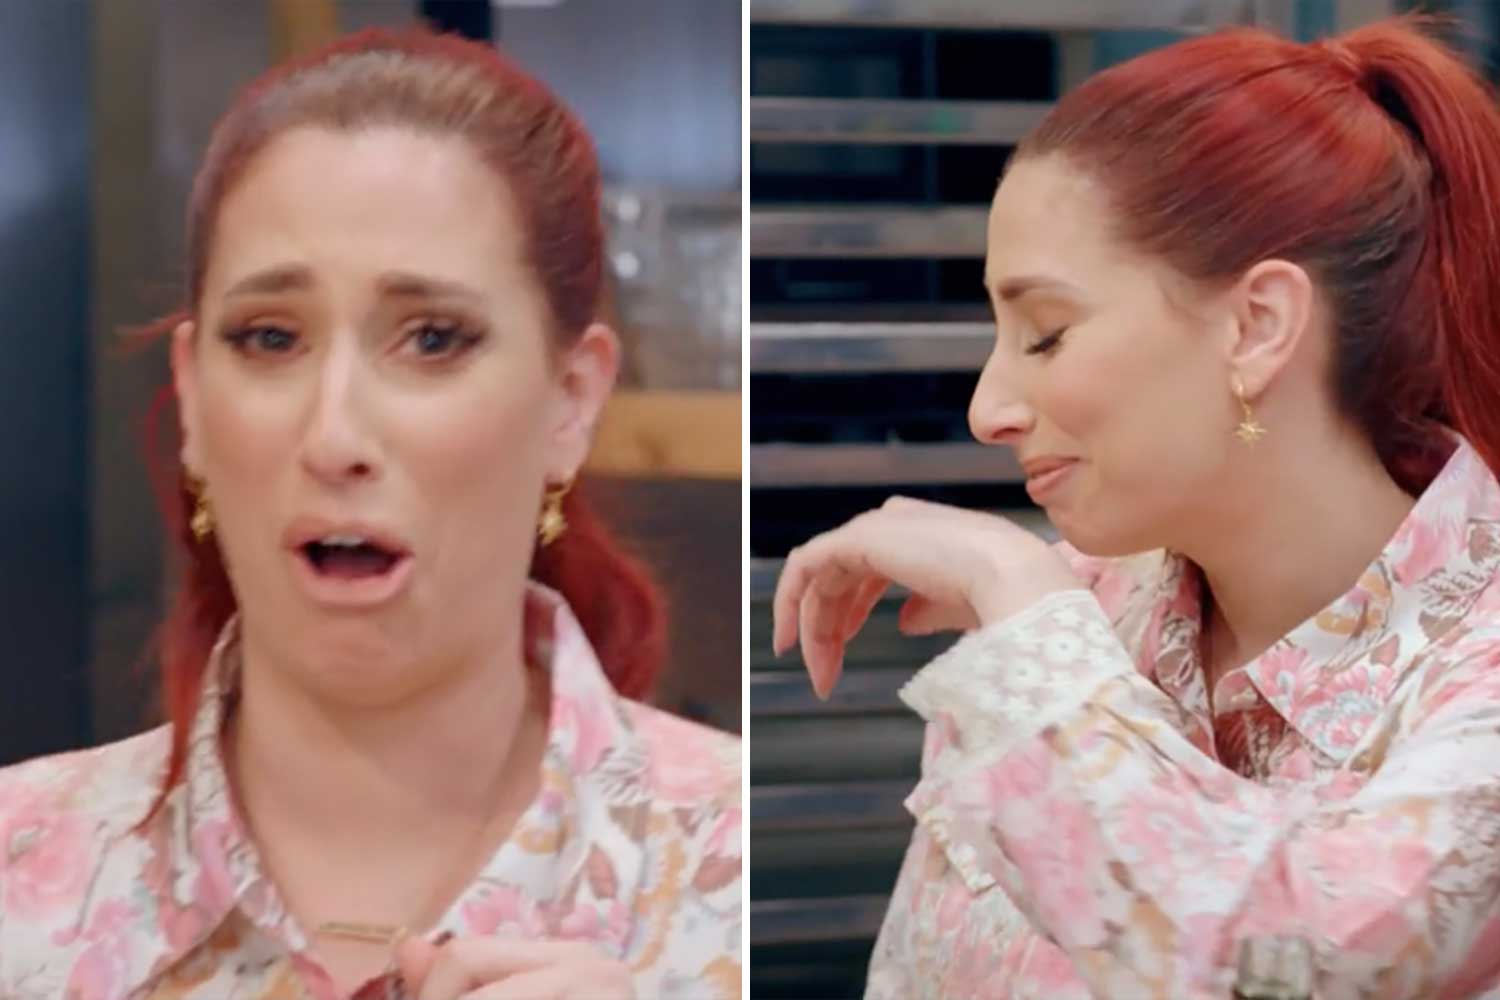 Bake Off The Professionals: Stacey Solomon was left gasping for air and unable speak.